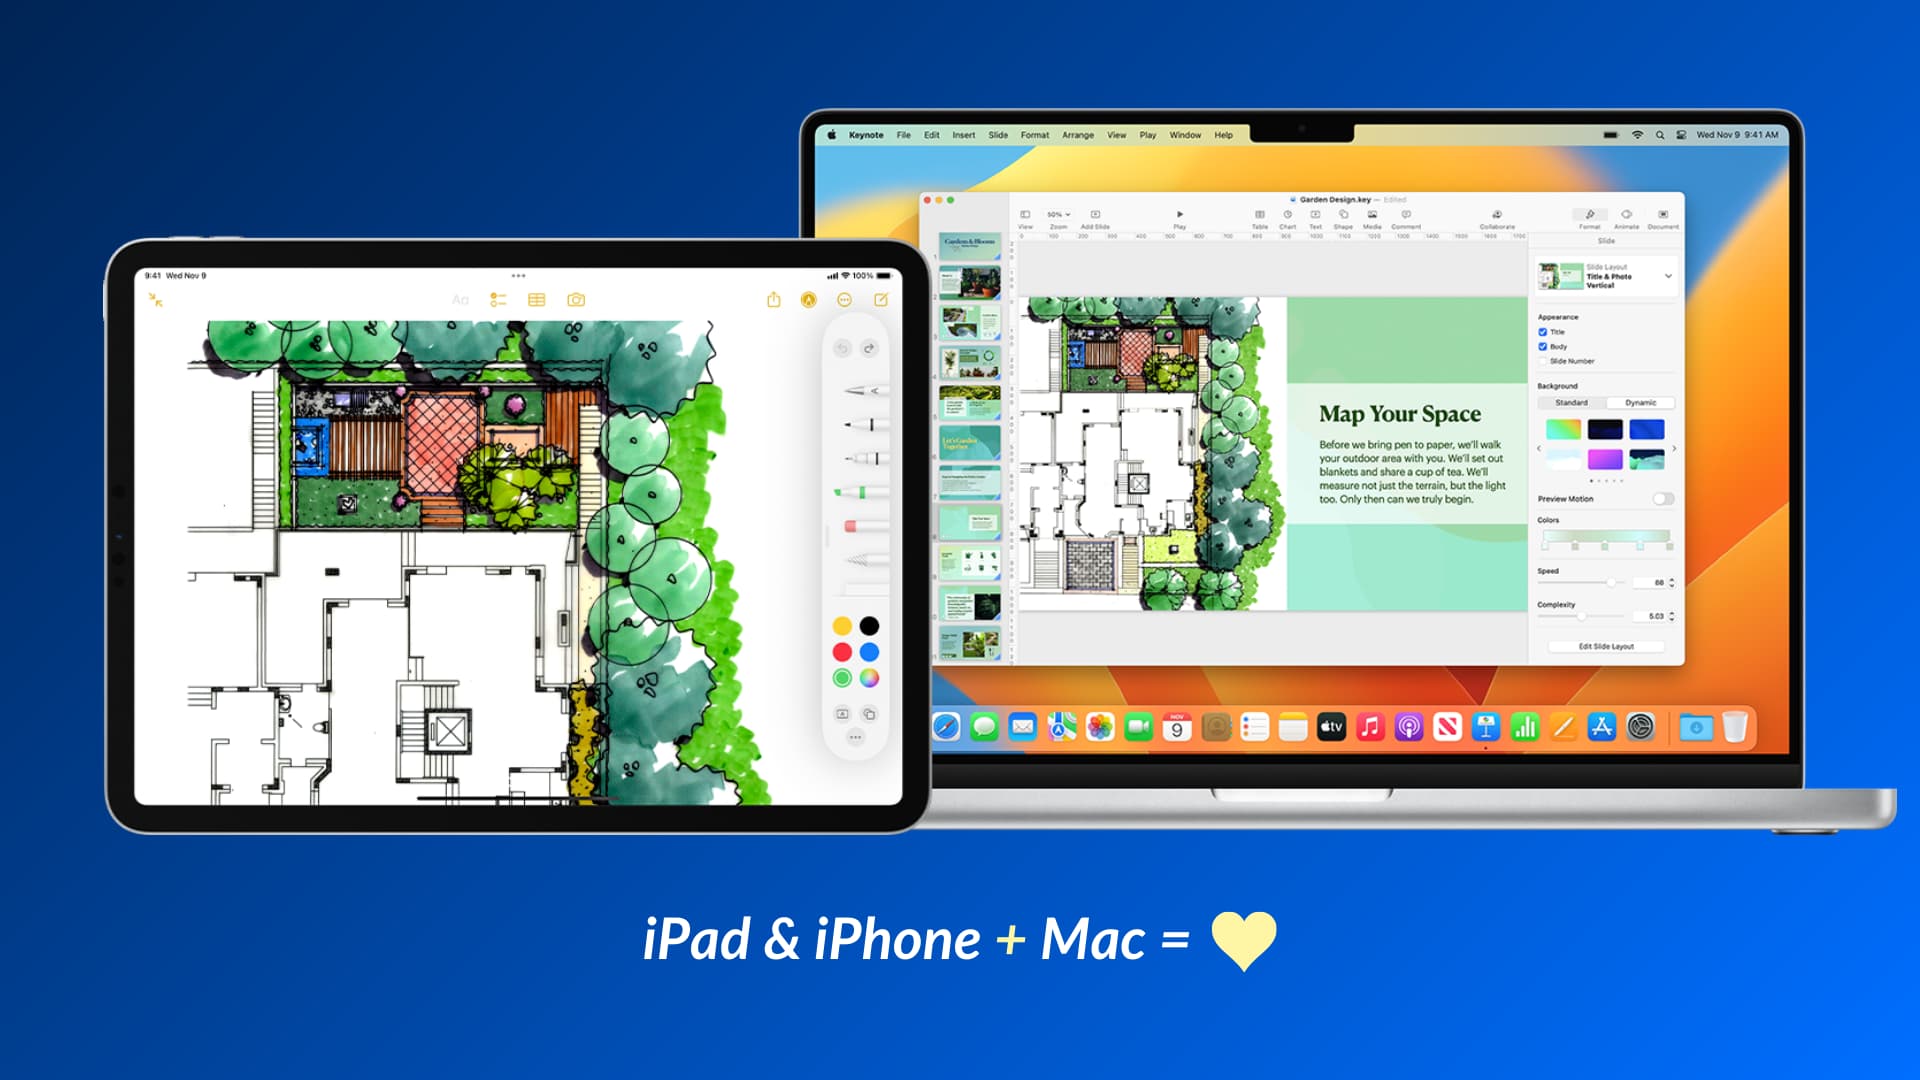 15 ways to use your iPad and iPhone together with your Mac